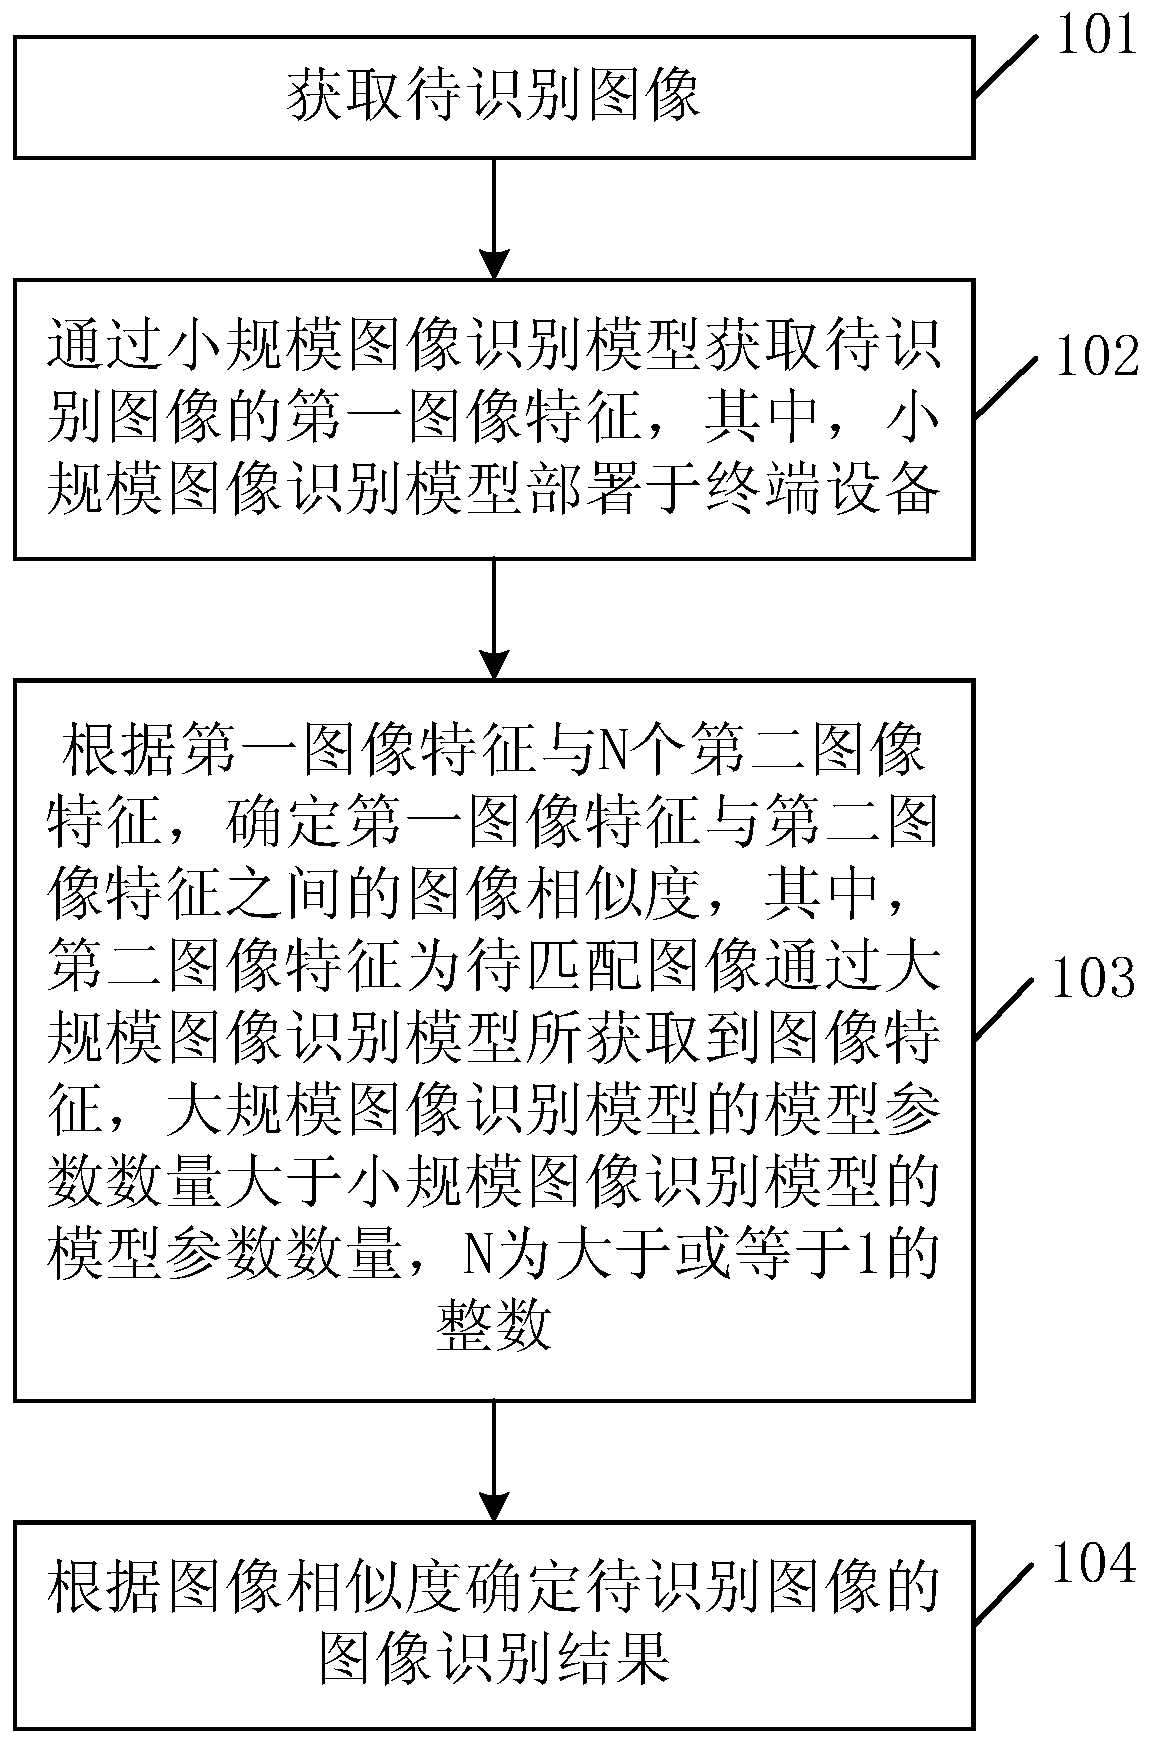 Image recognition method and device and image recognition model training method and device